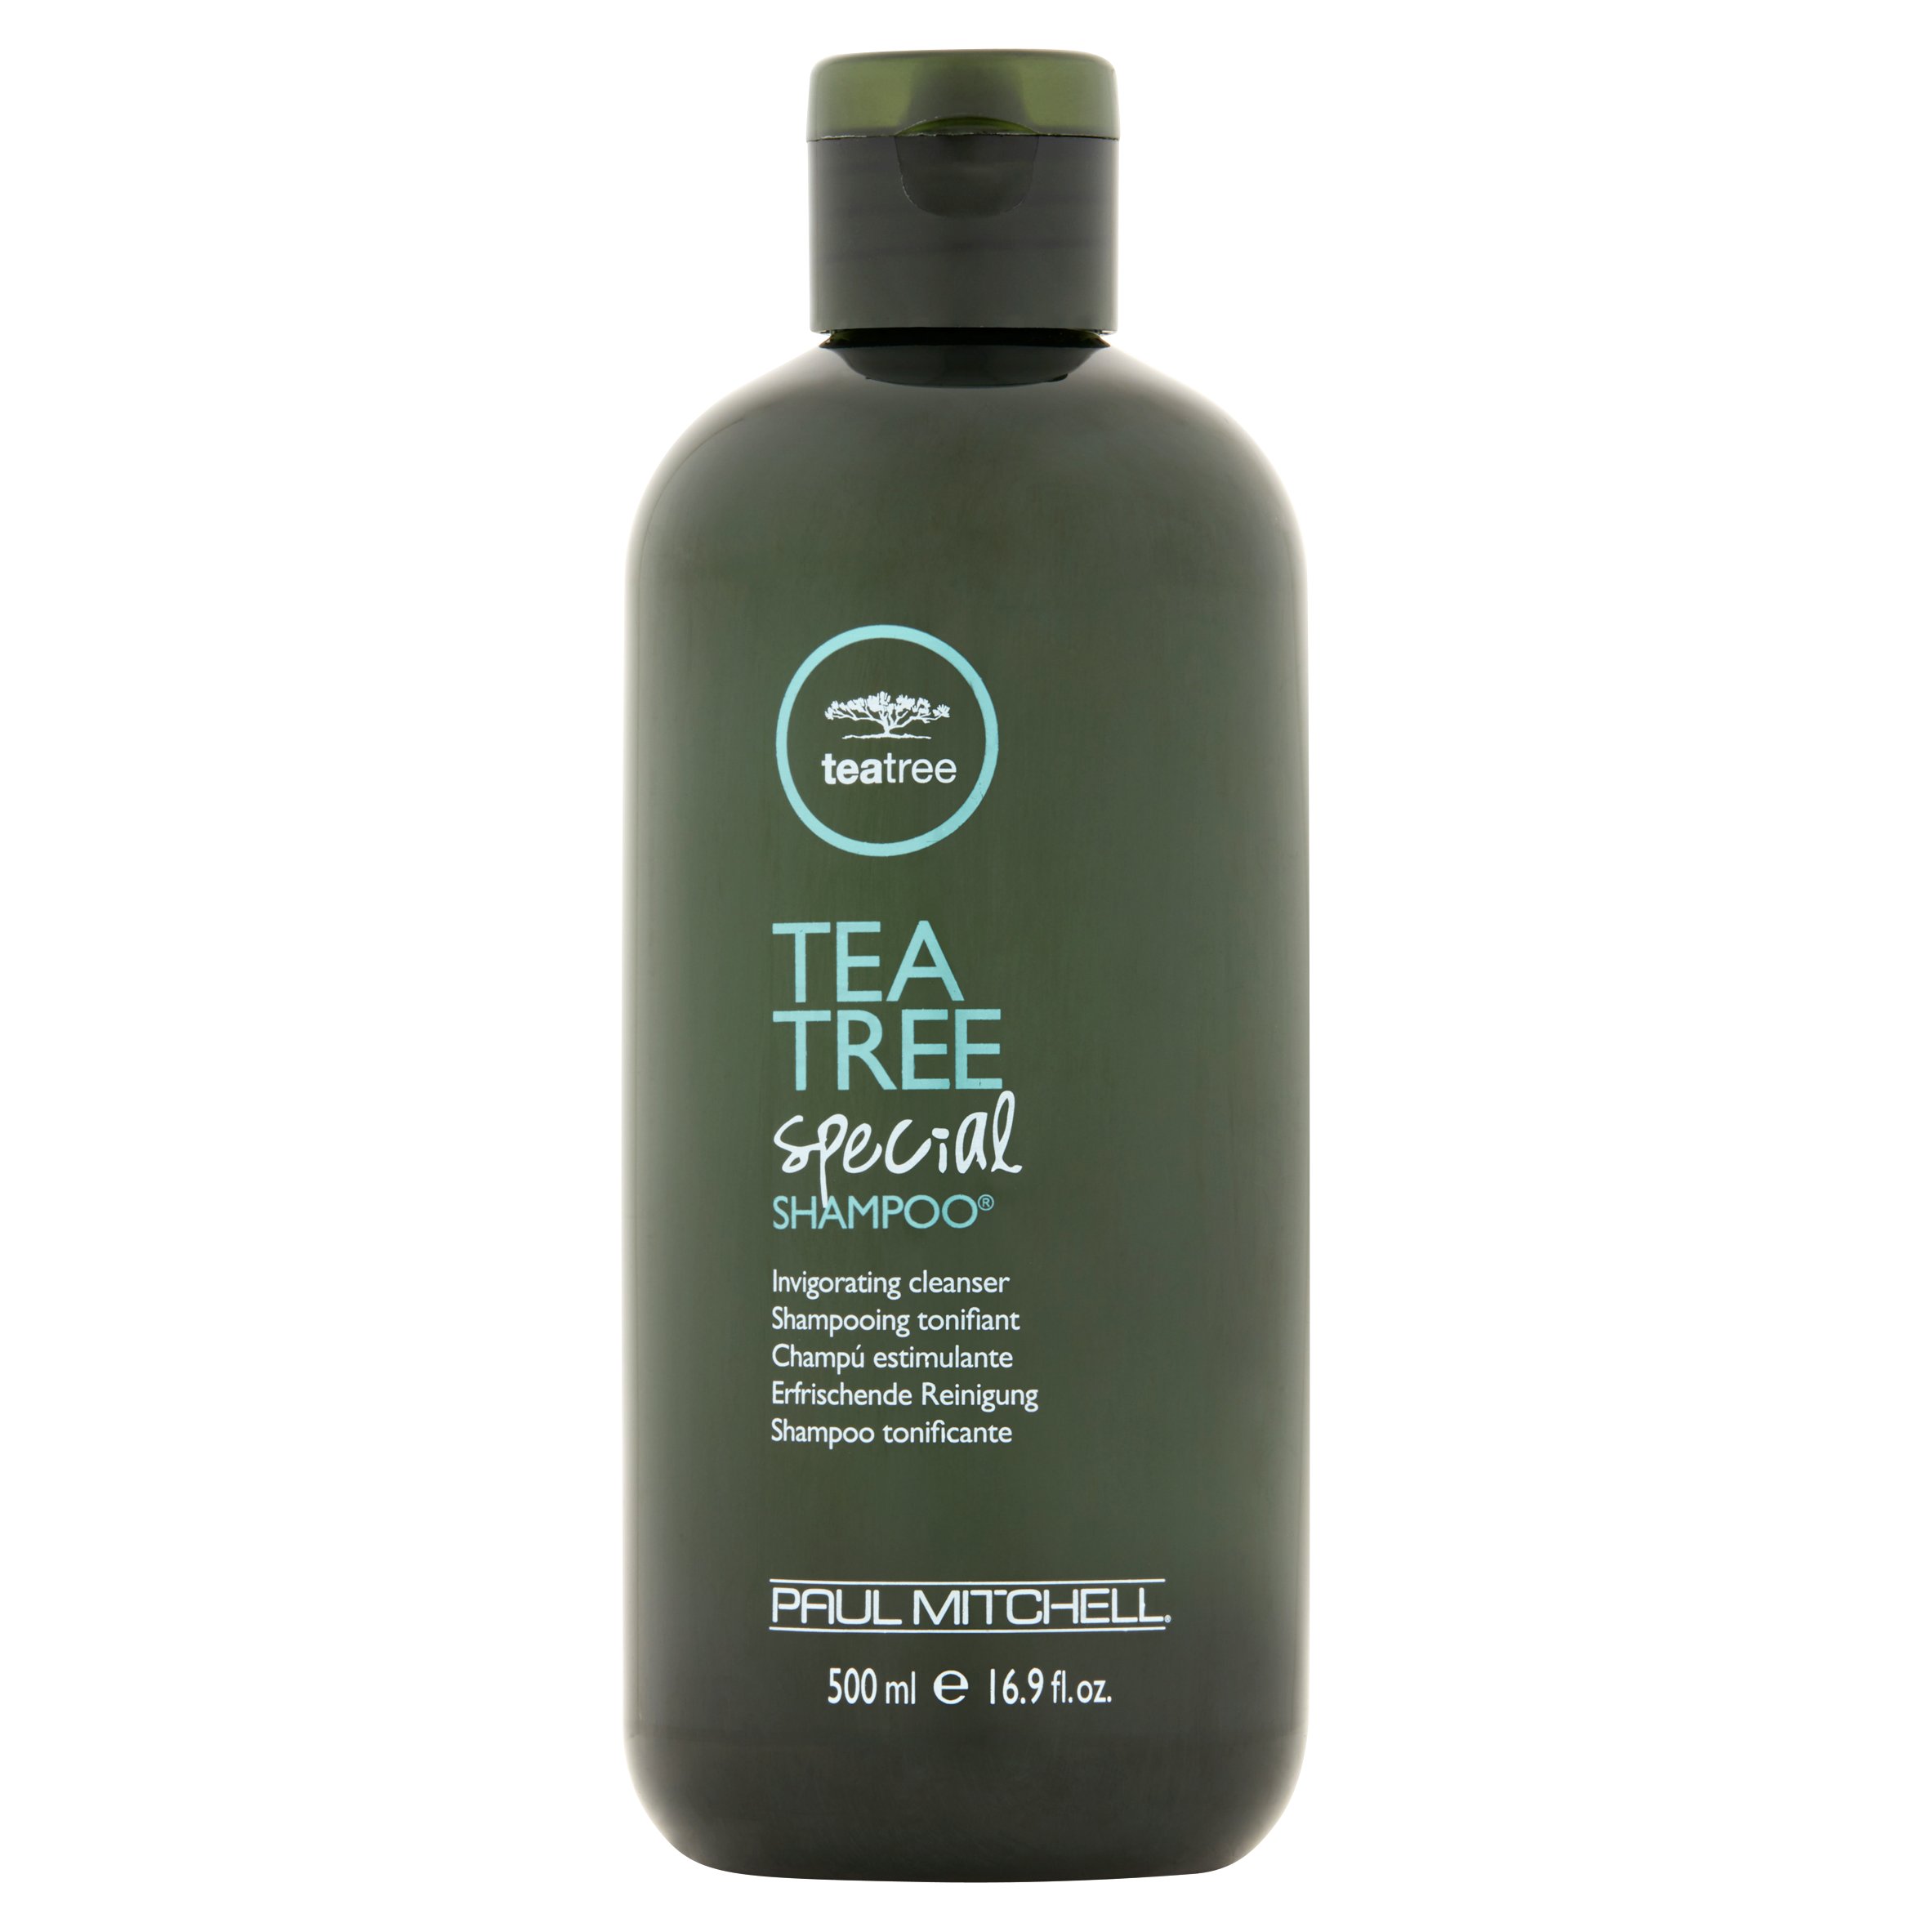 Paul Mitchell Tea Tree Special Clarifying Daily Shampoo with Peppermint & Lavender, 16.9 fl oz - image 1 of 4